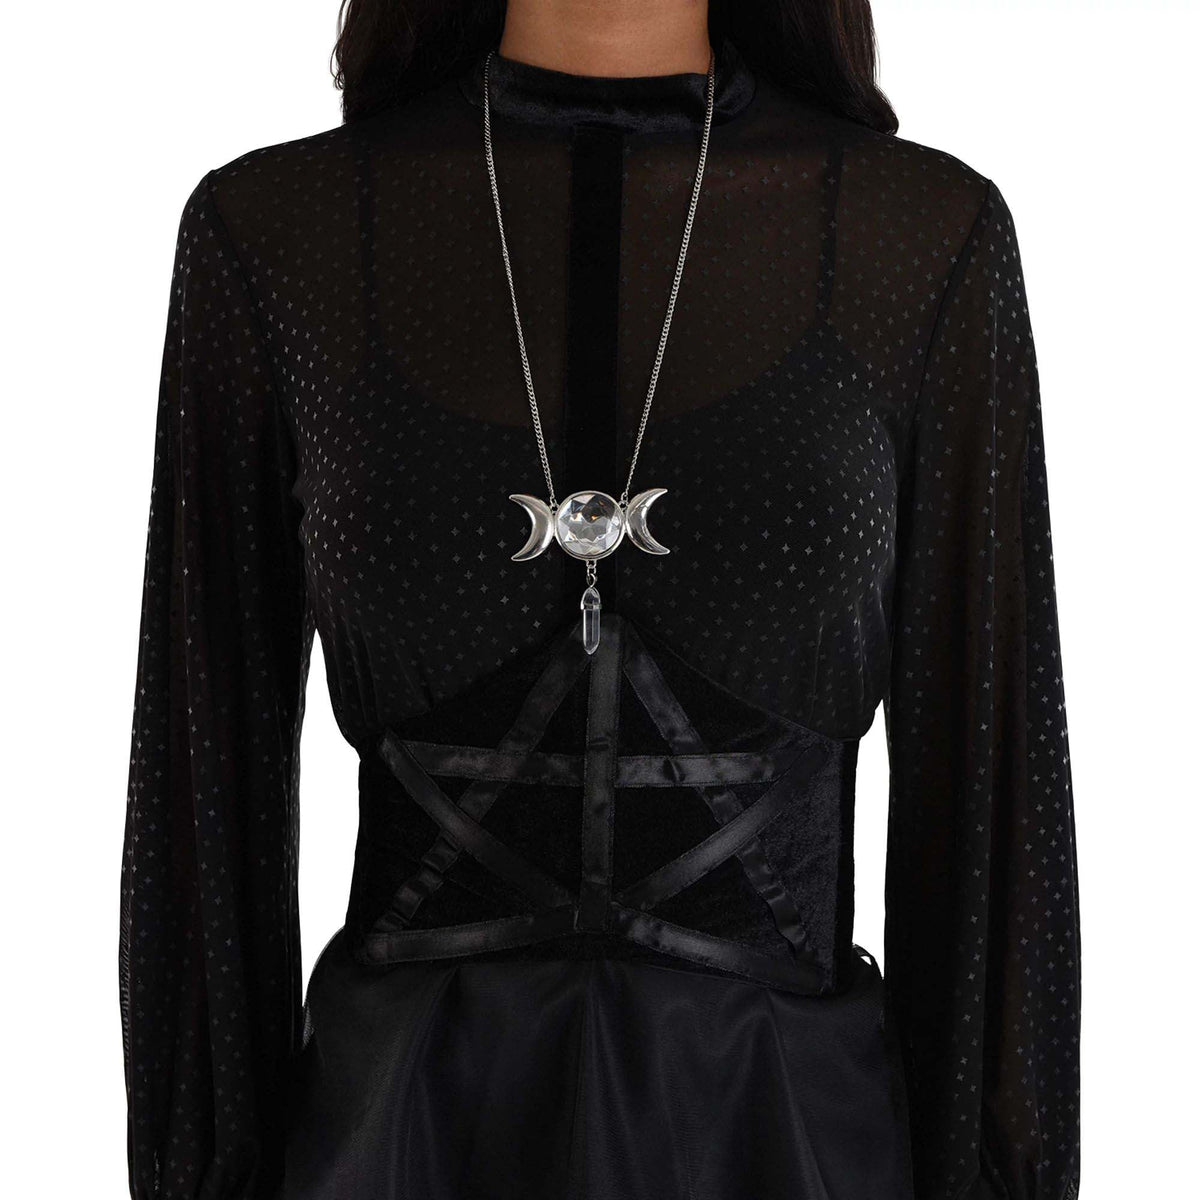 HALLOWEEN COSTUME CO. Costume Accessories Coven Witch Necklace for Adults